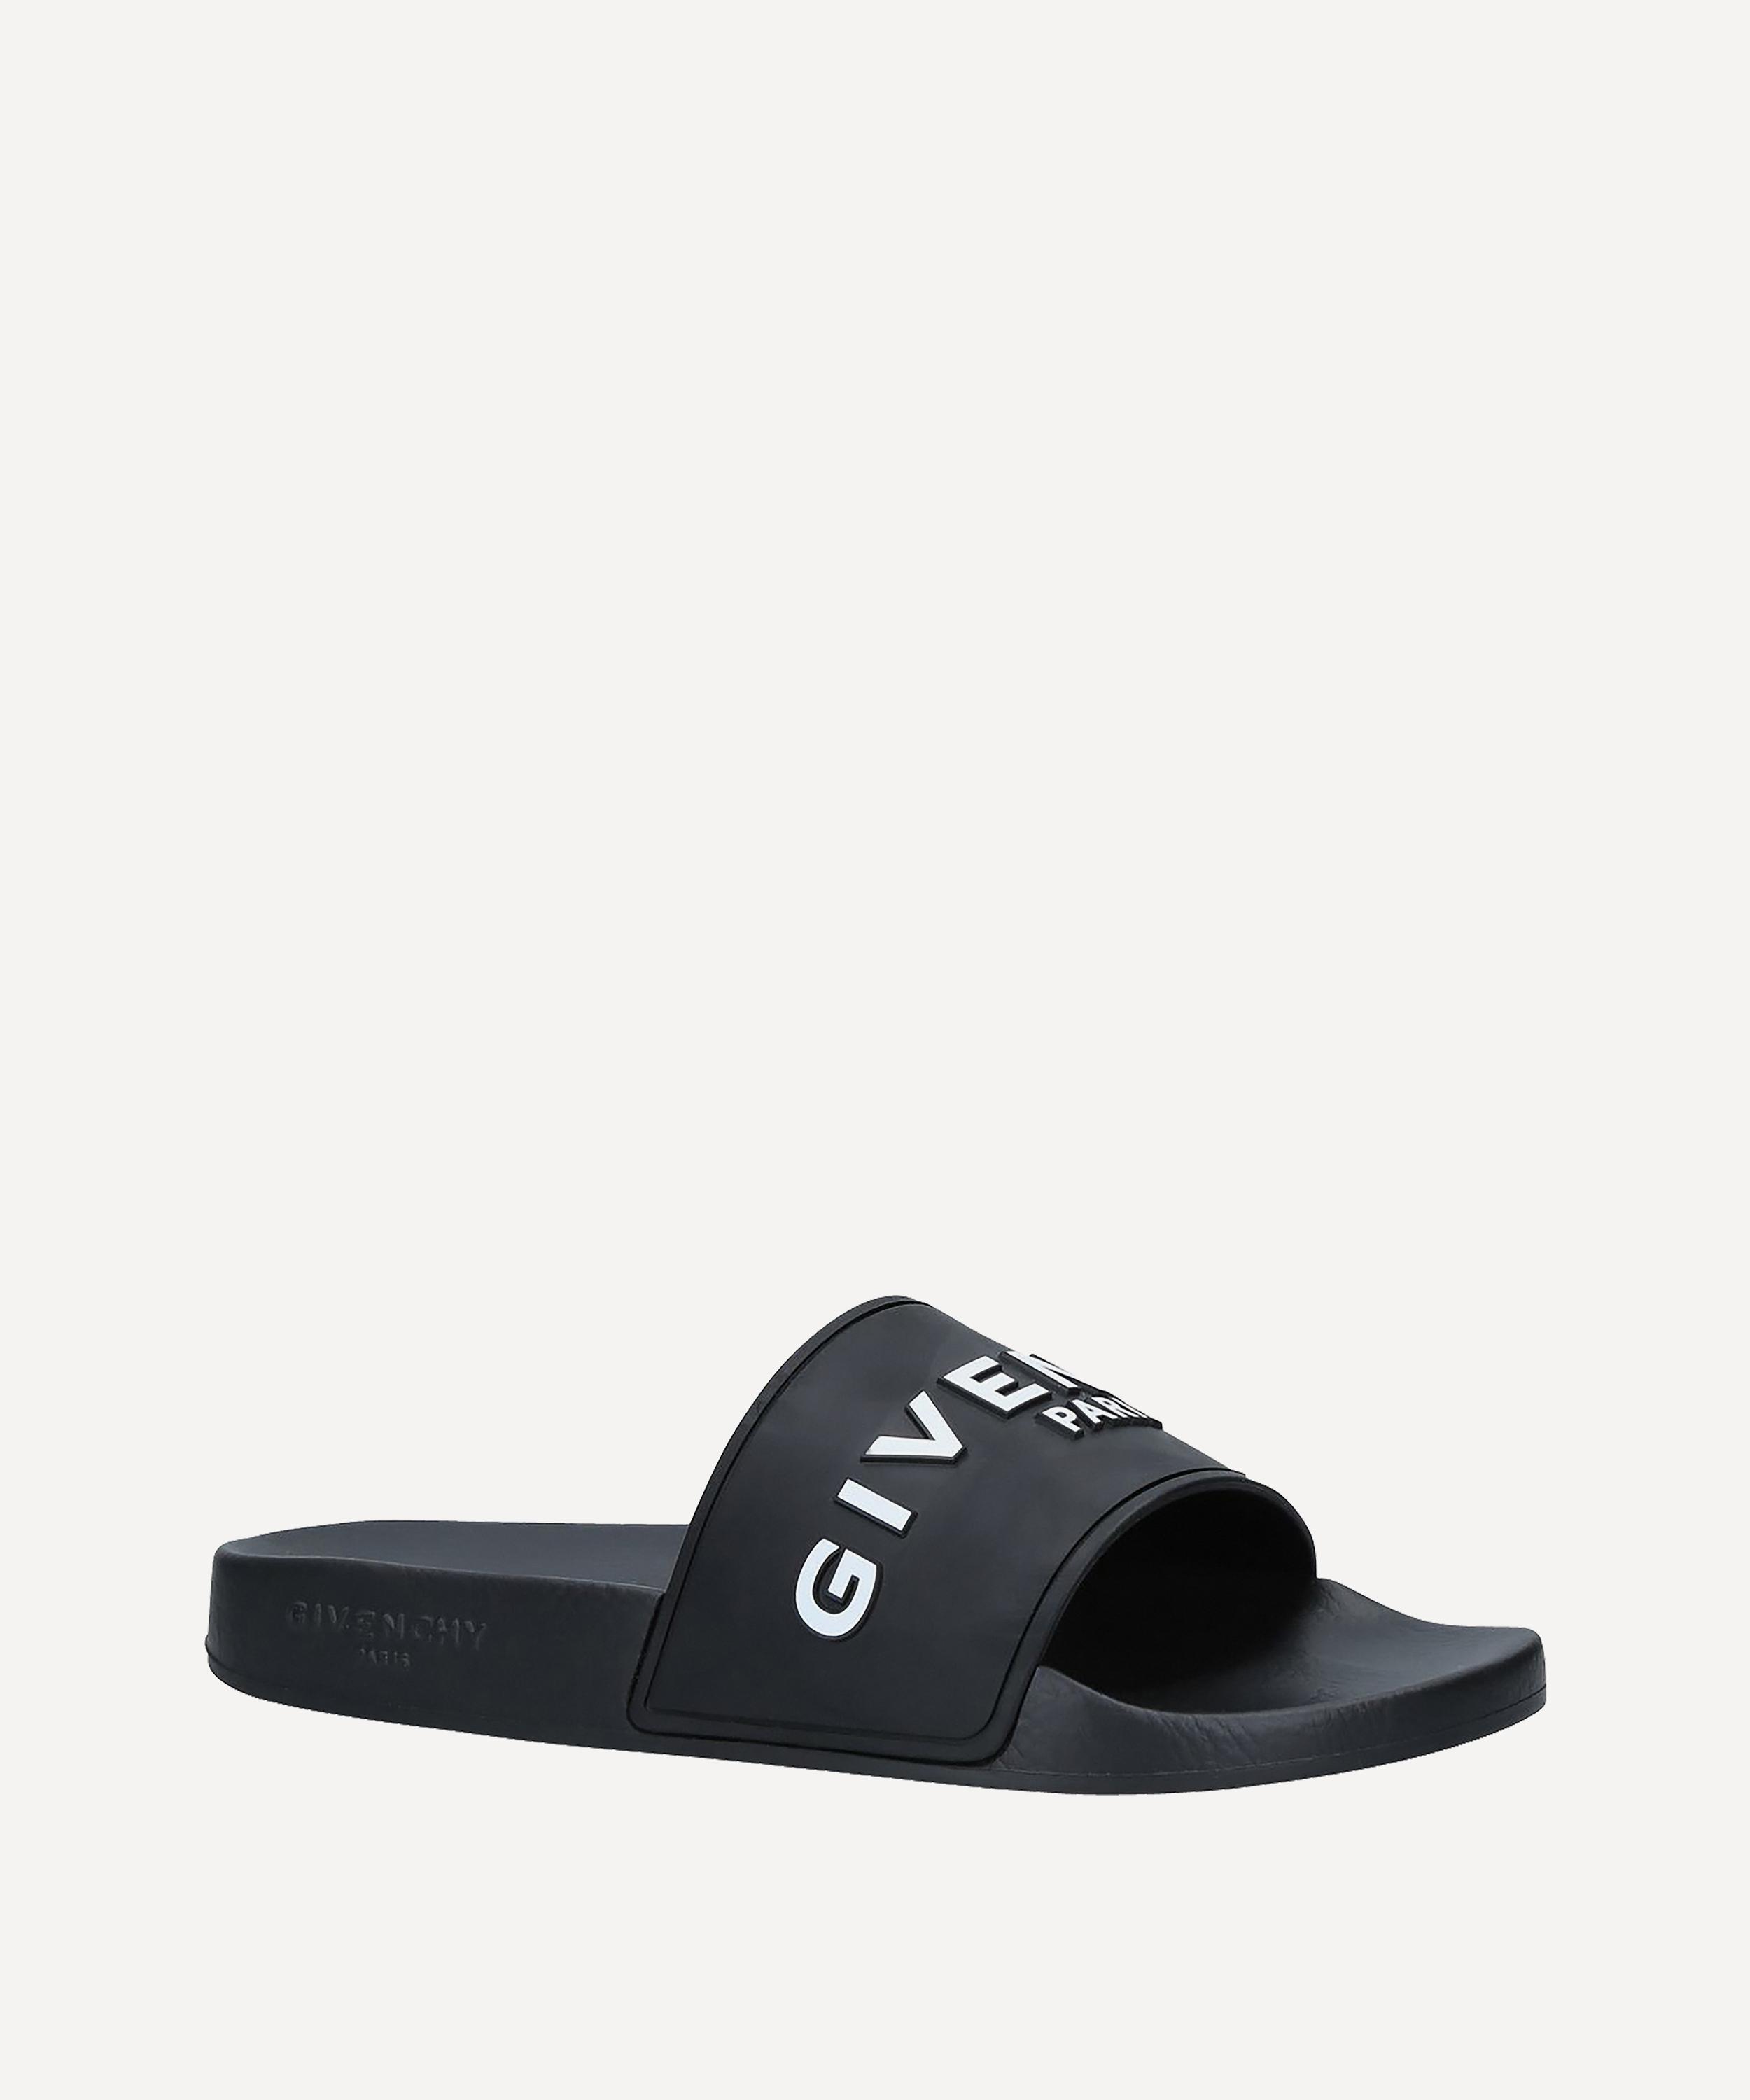 Givenchy Logo Rubber Sliders in Black - Lyst